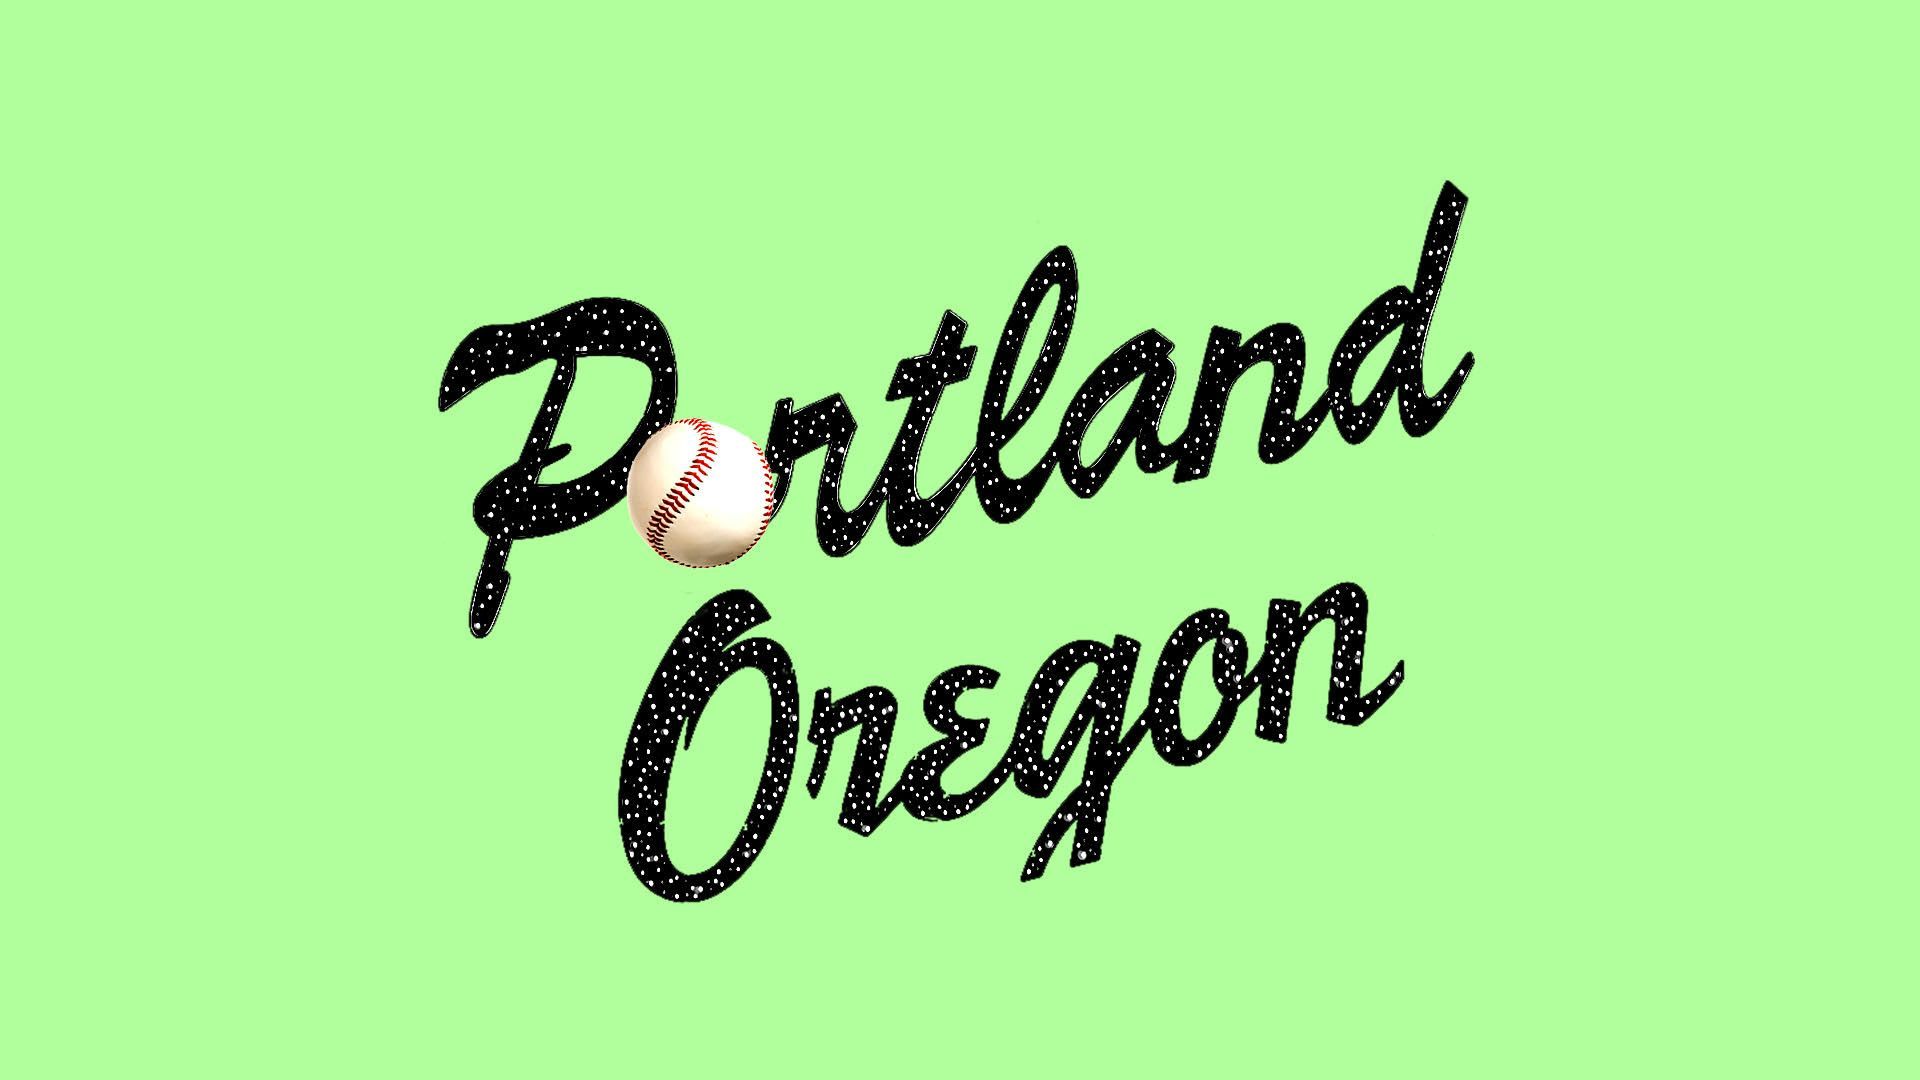 Illustration of Portland, Oregon sign with a baseball replacing the "o" in Portland